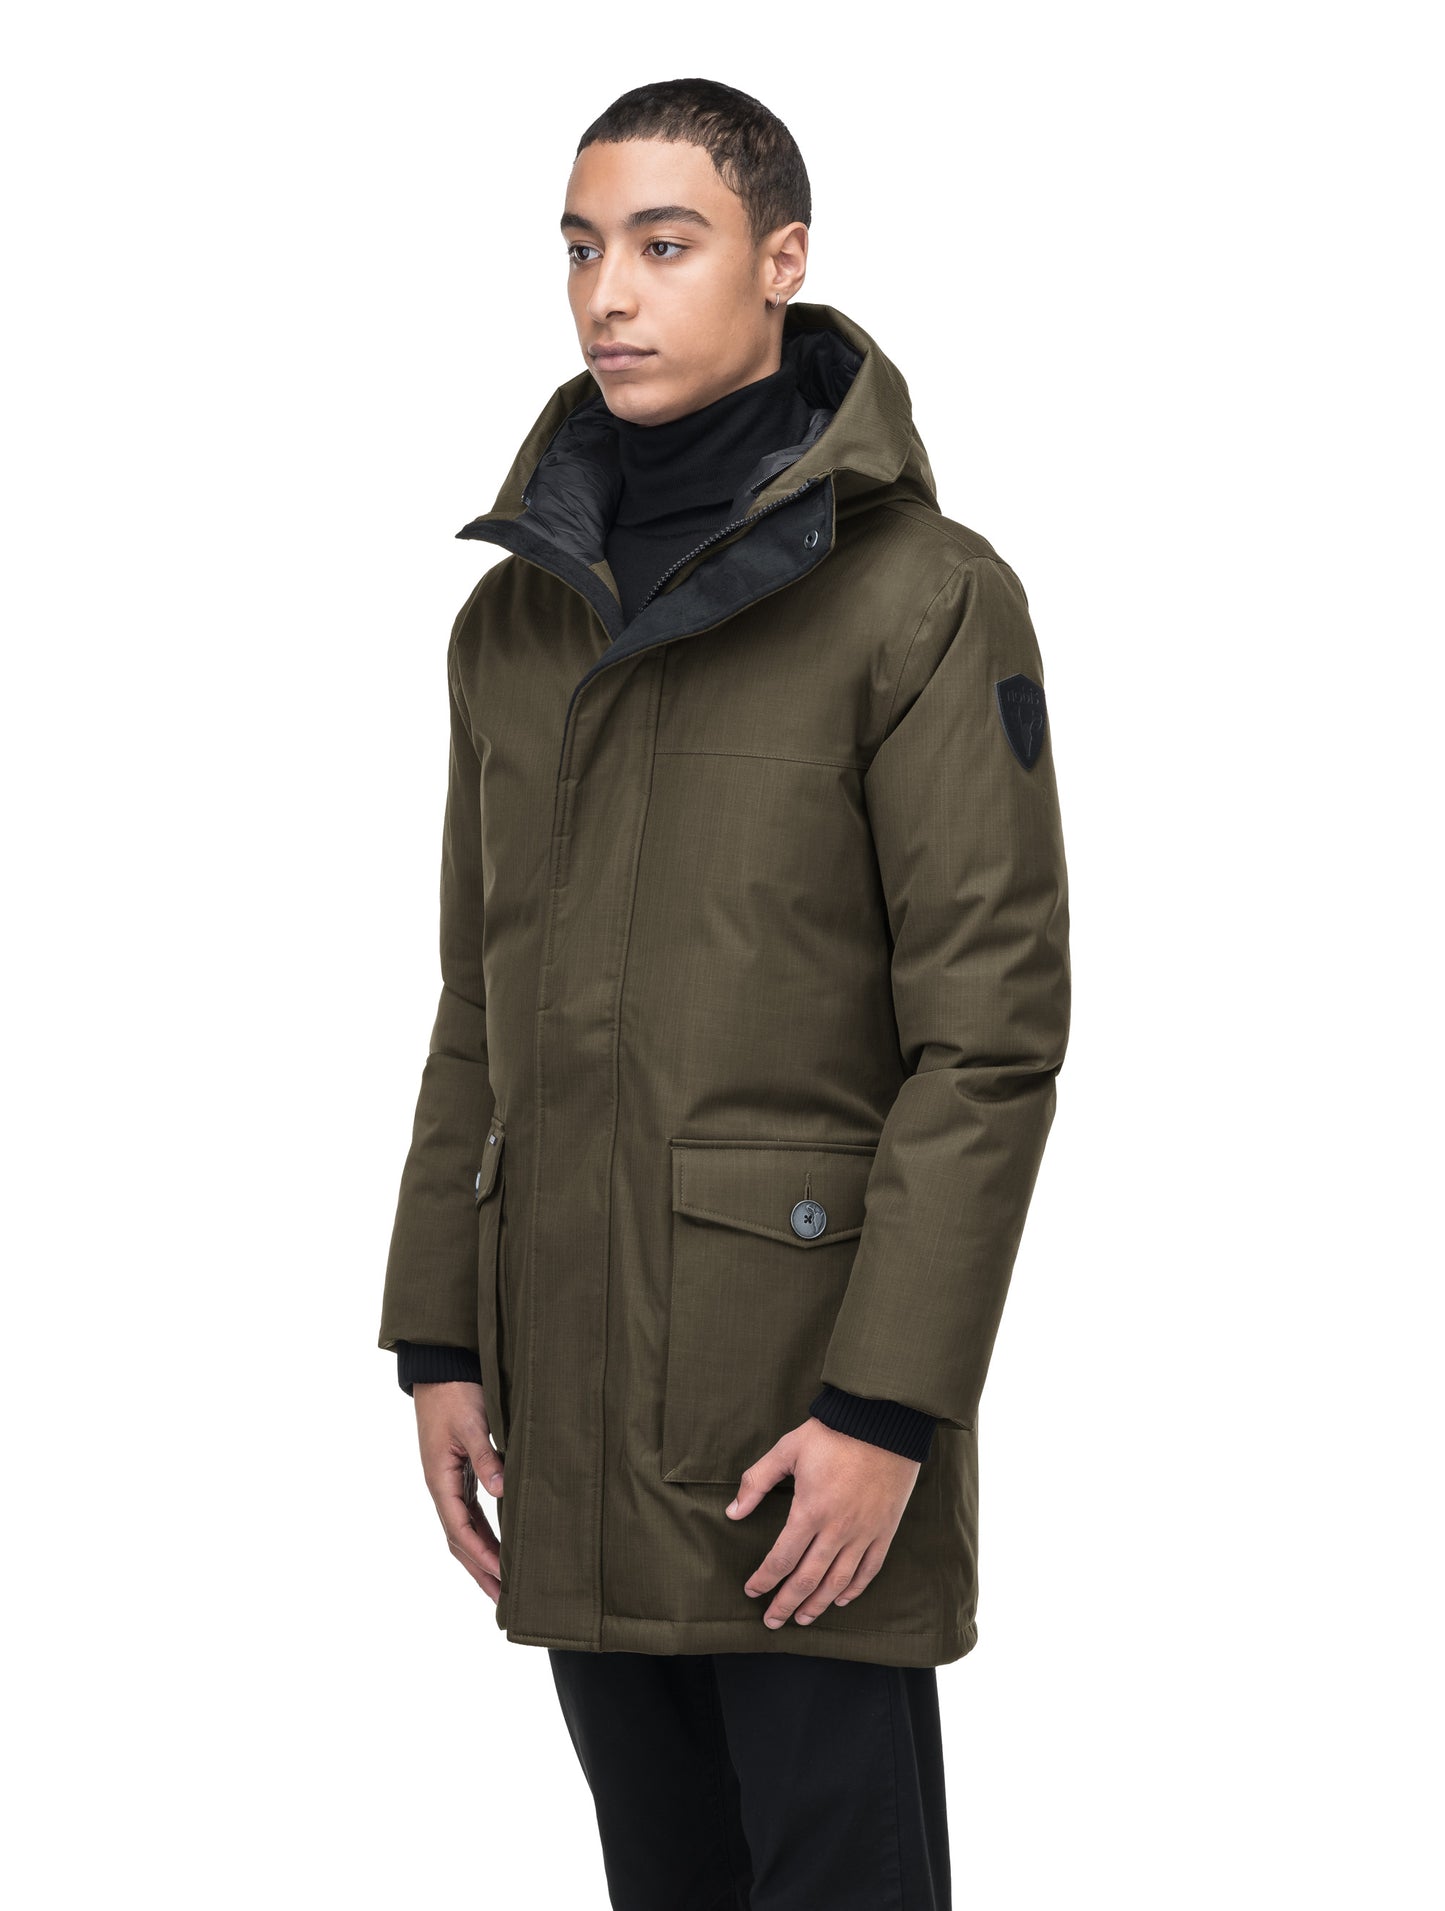 Yves Furless Men's Parka in thigh length, Canadian white duck down insulation, non-removable down-filled hood, flap pockets at waist, centre-front two-way zipper with magnetic wind flap, and elastic ribbed cuffs, in CH Fatigue